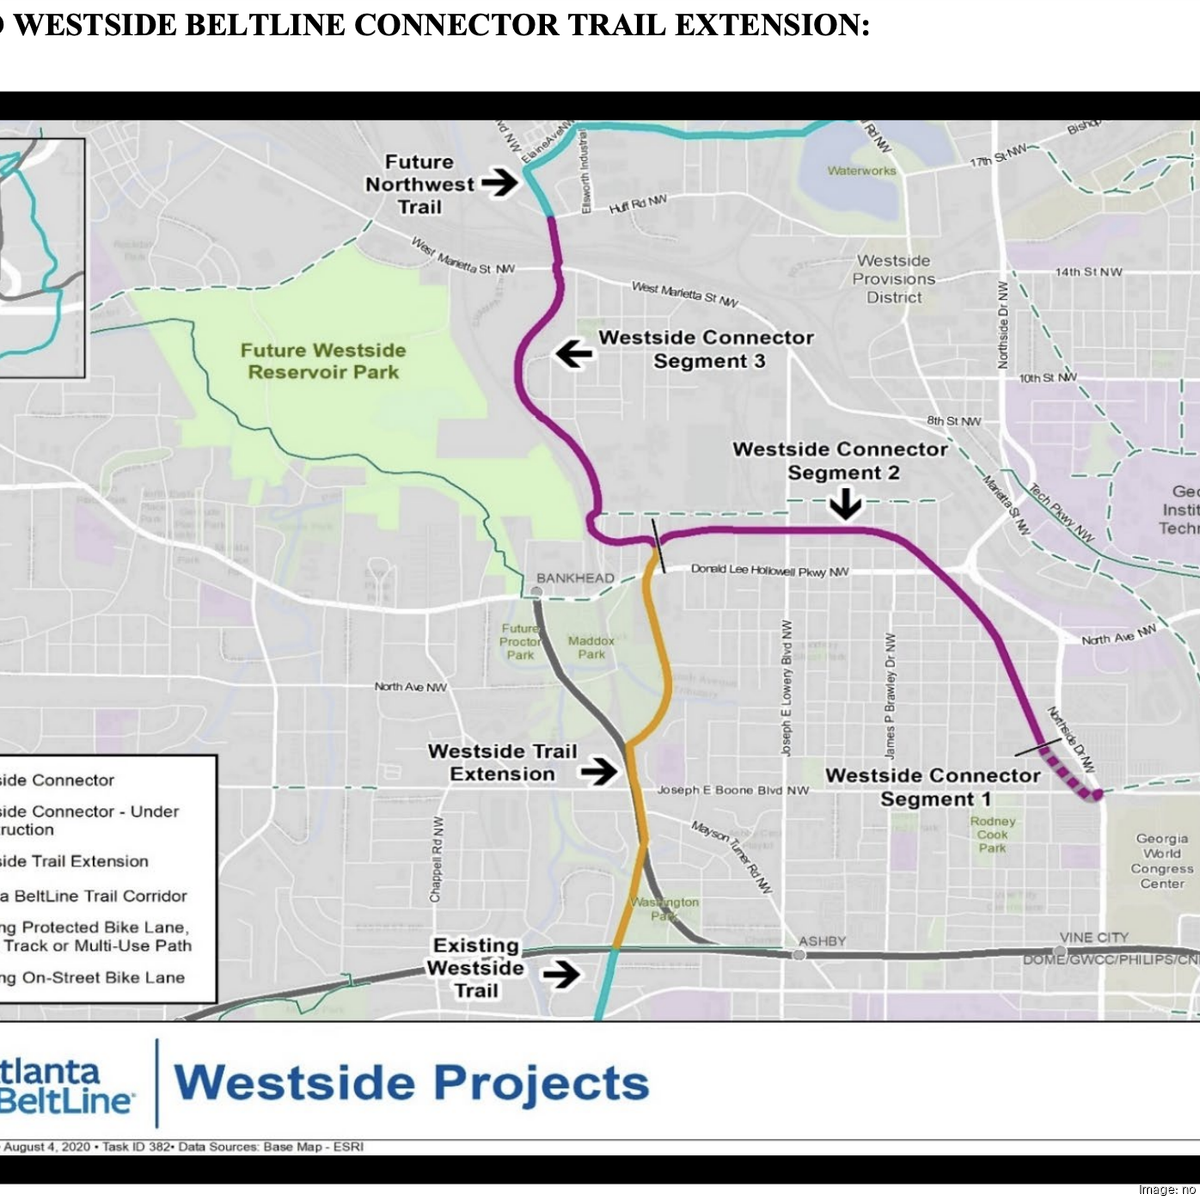 Proposed Connector Trail Through School Property Sparks